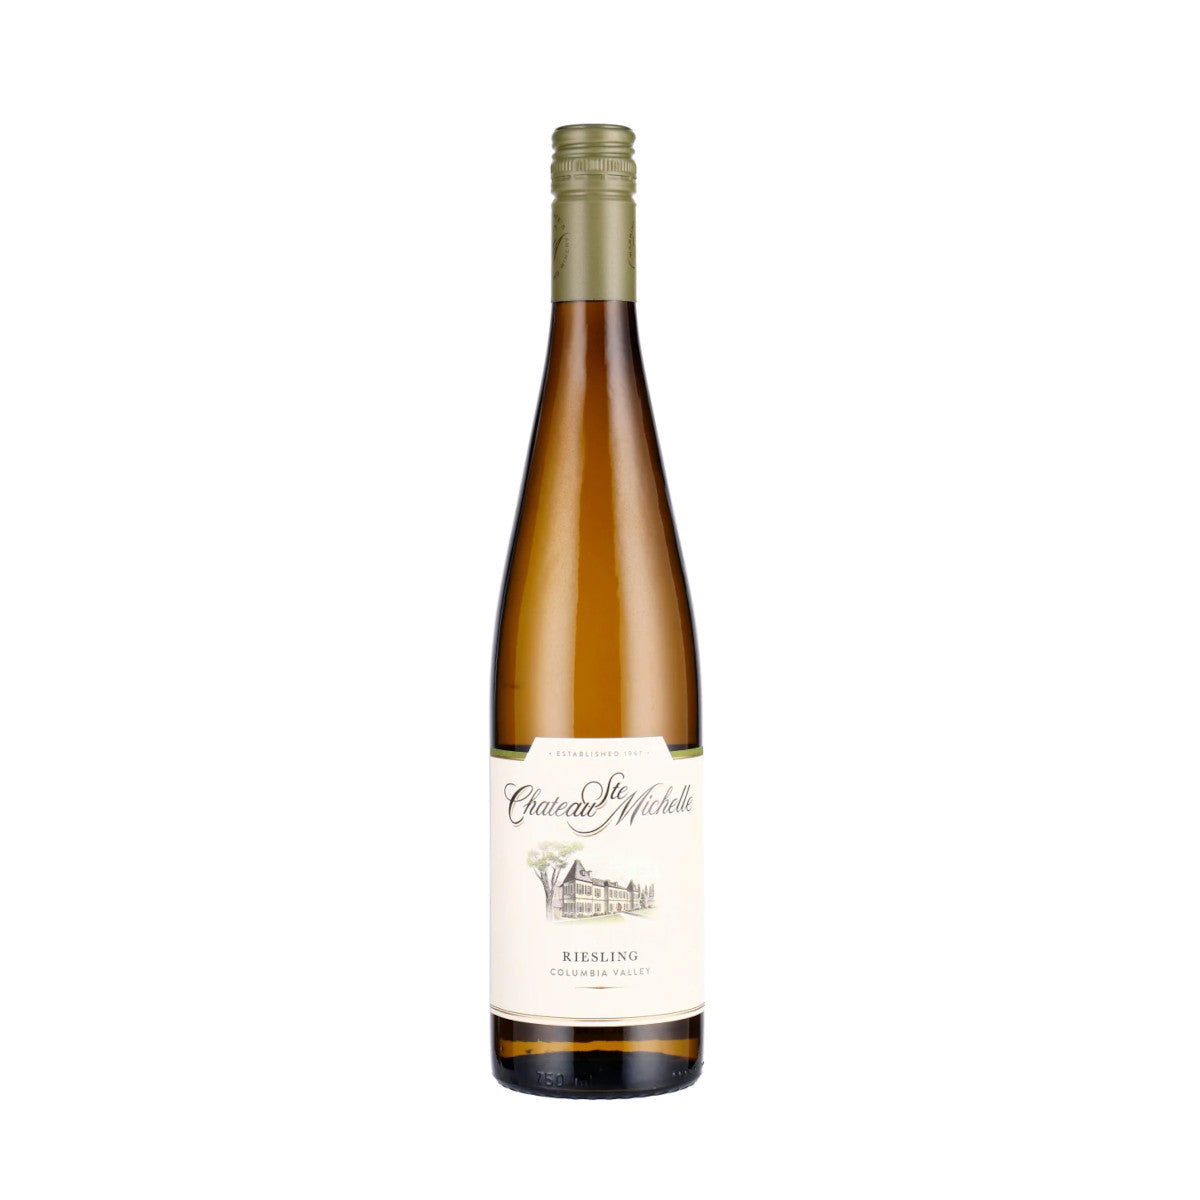 Chateau Ste. Michelle, Riesling - Columbia Valley, Washington State